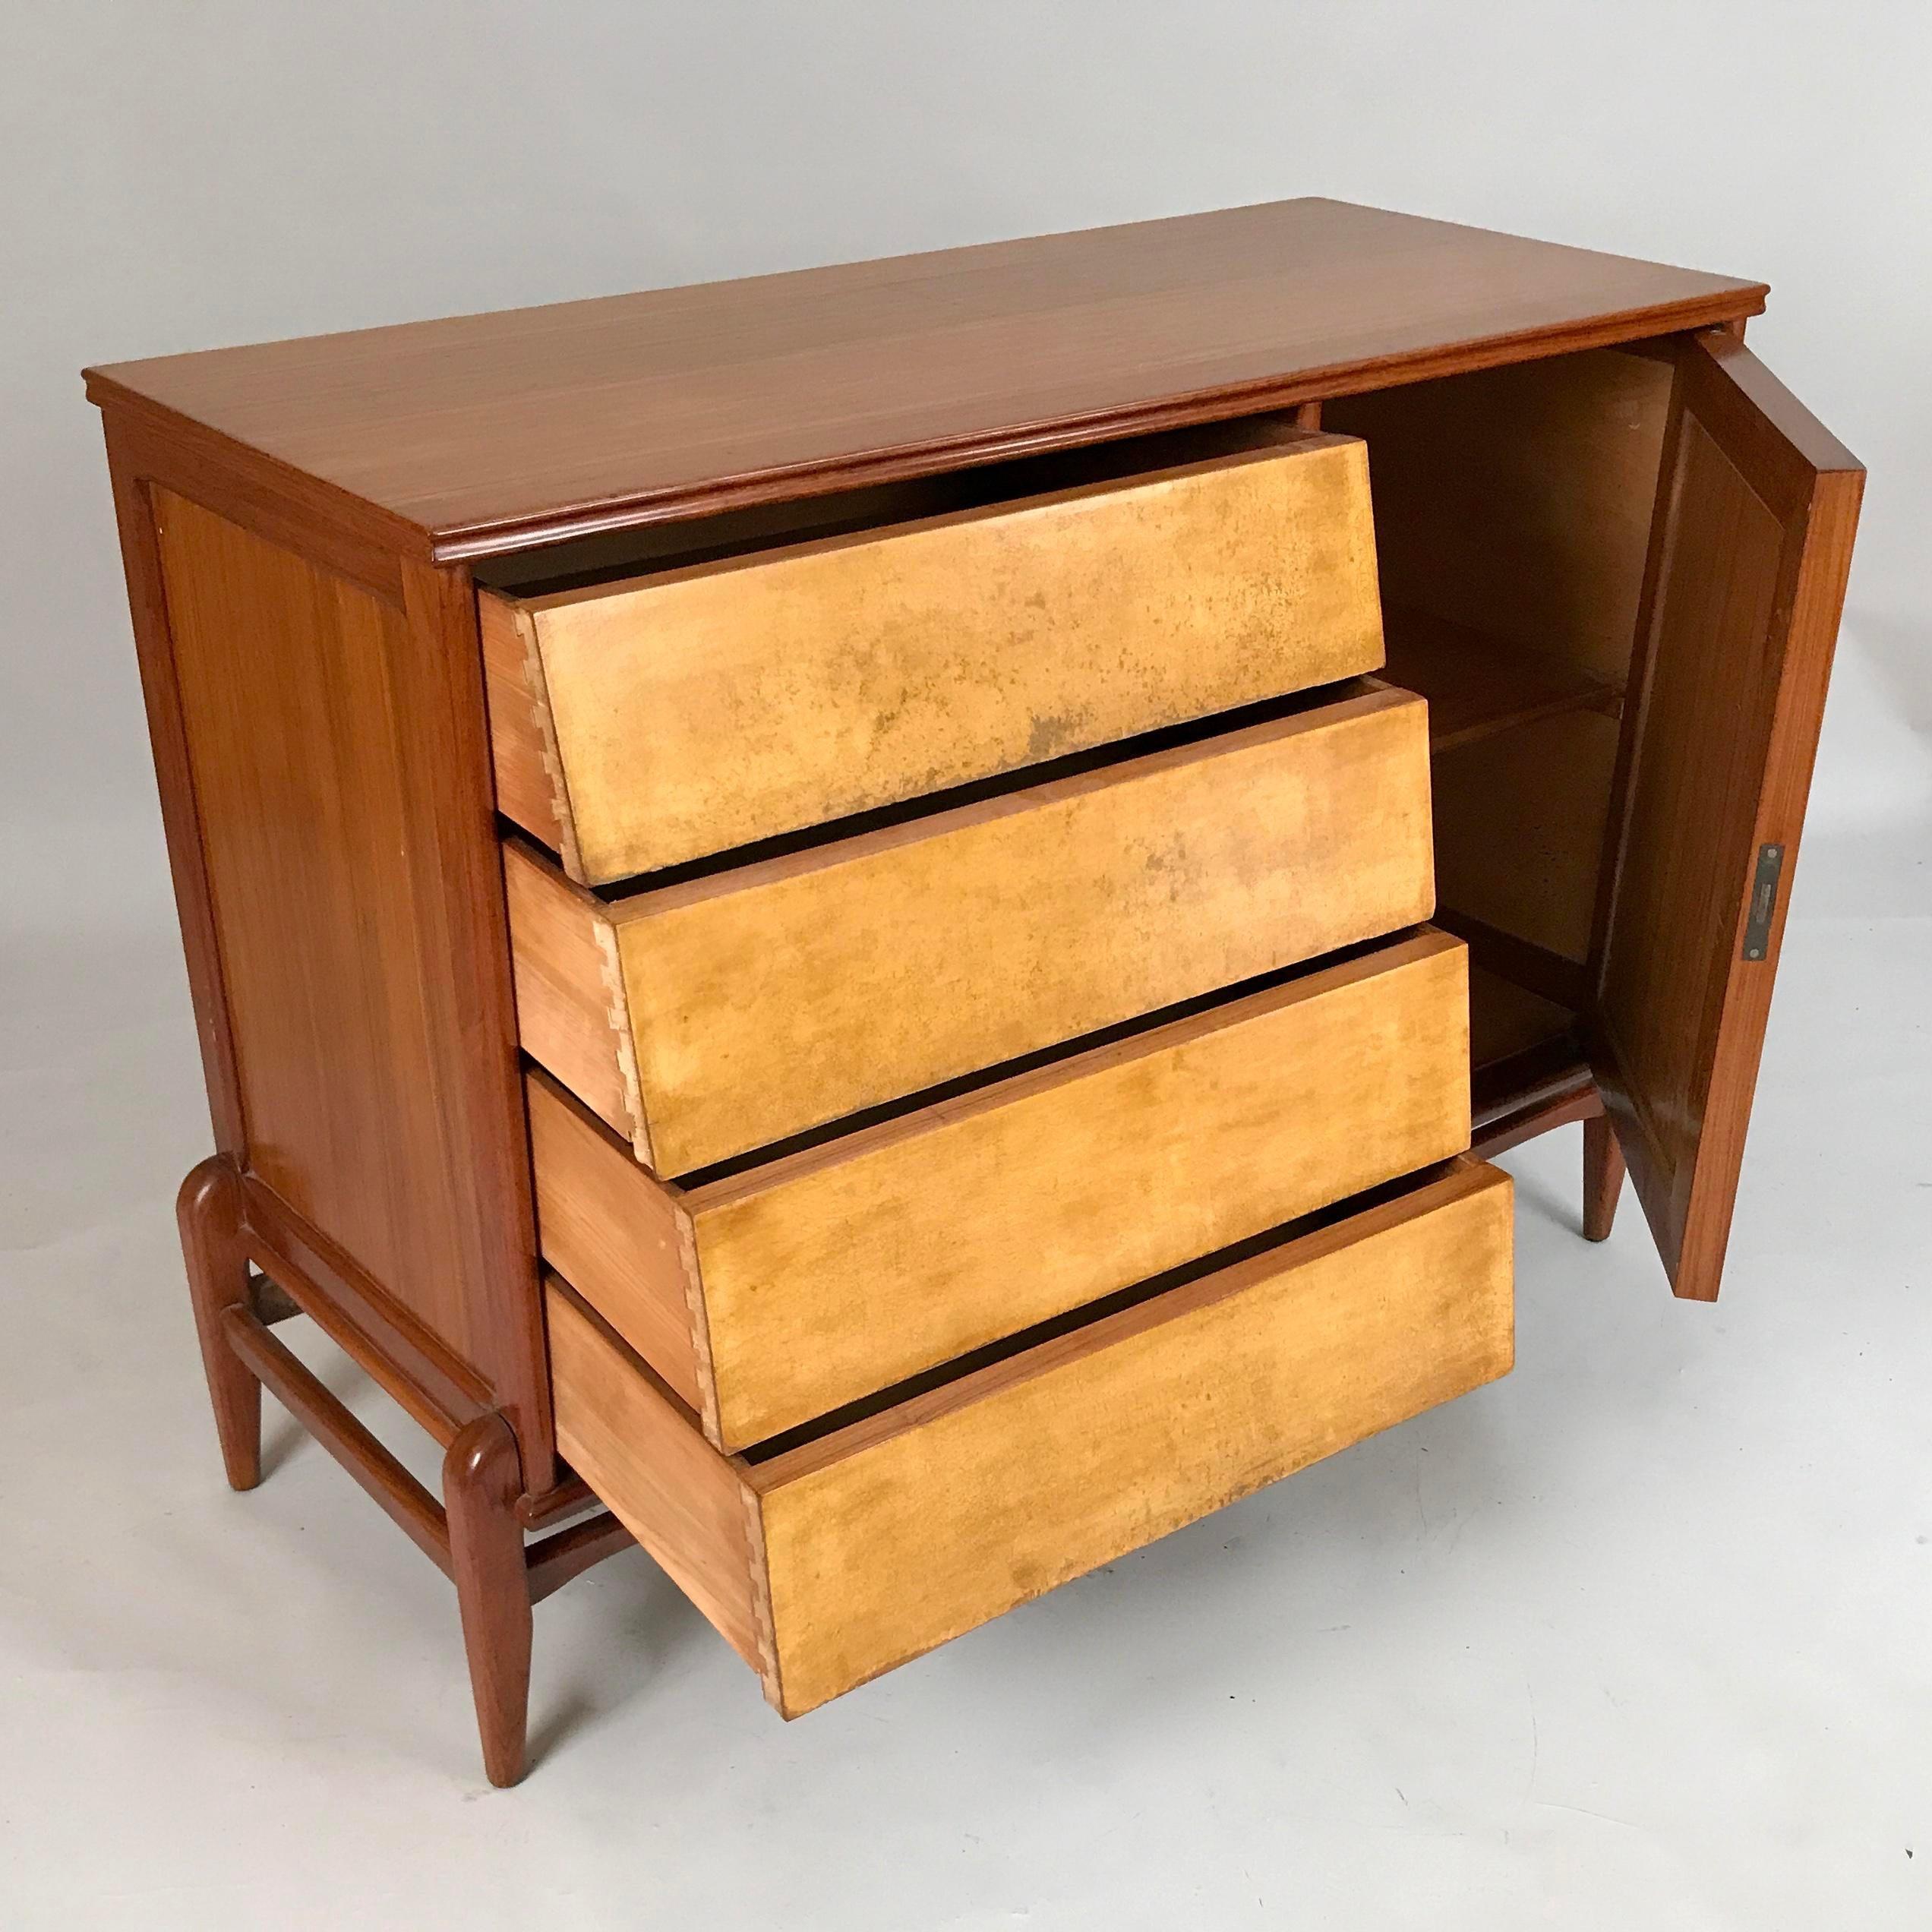 This Circa 1940 Italian Parchment furniture set may be a sideboard with side tables for a dining area or a chest of drawers with nightstands for a modern bedroom.

One of the small cabinets has a one-door compartment with a shelf. The other small